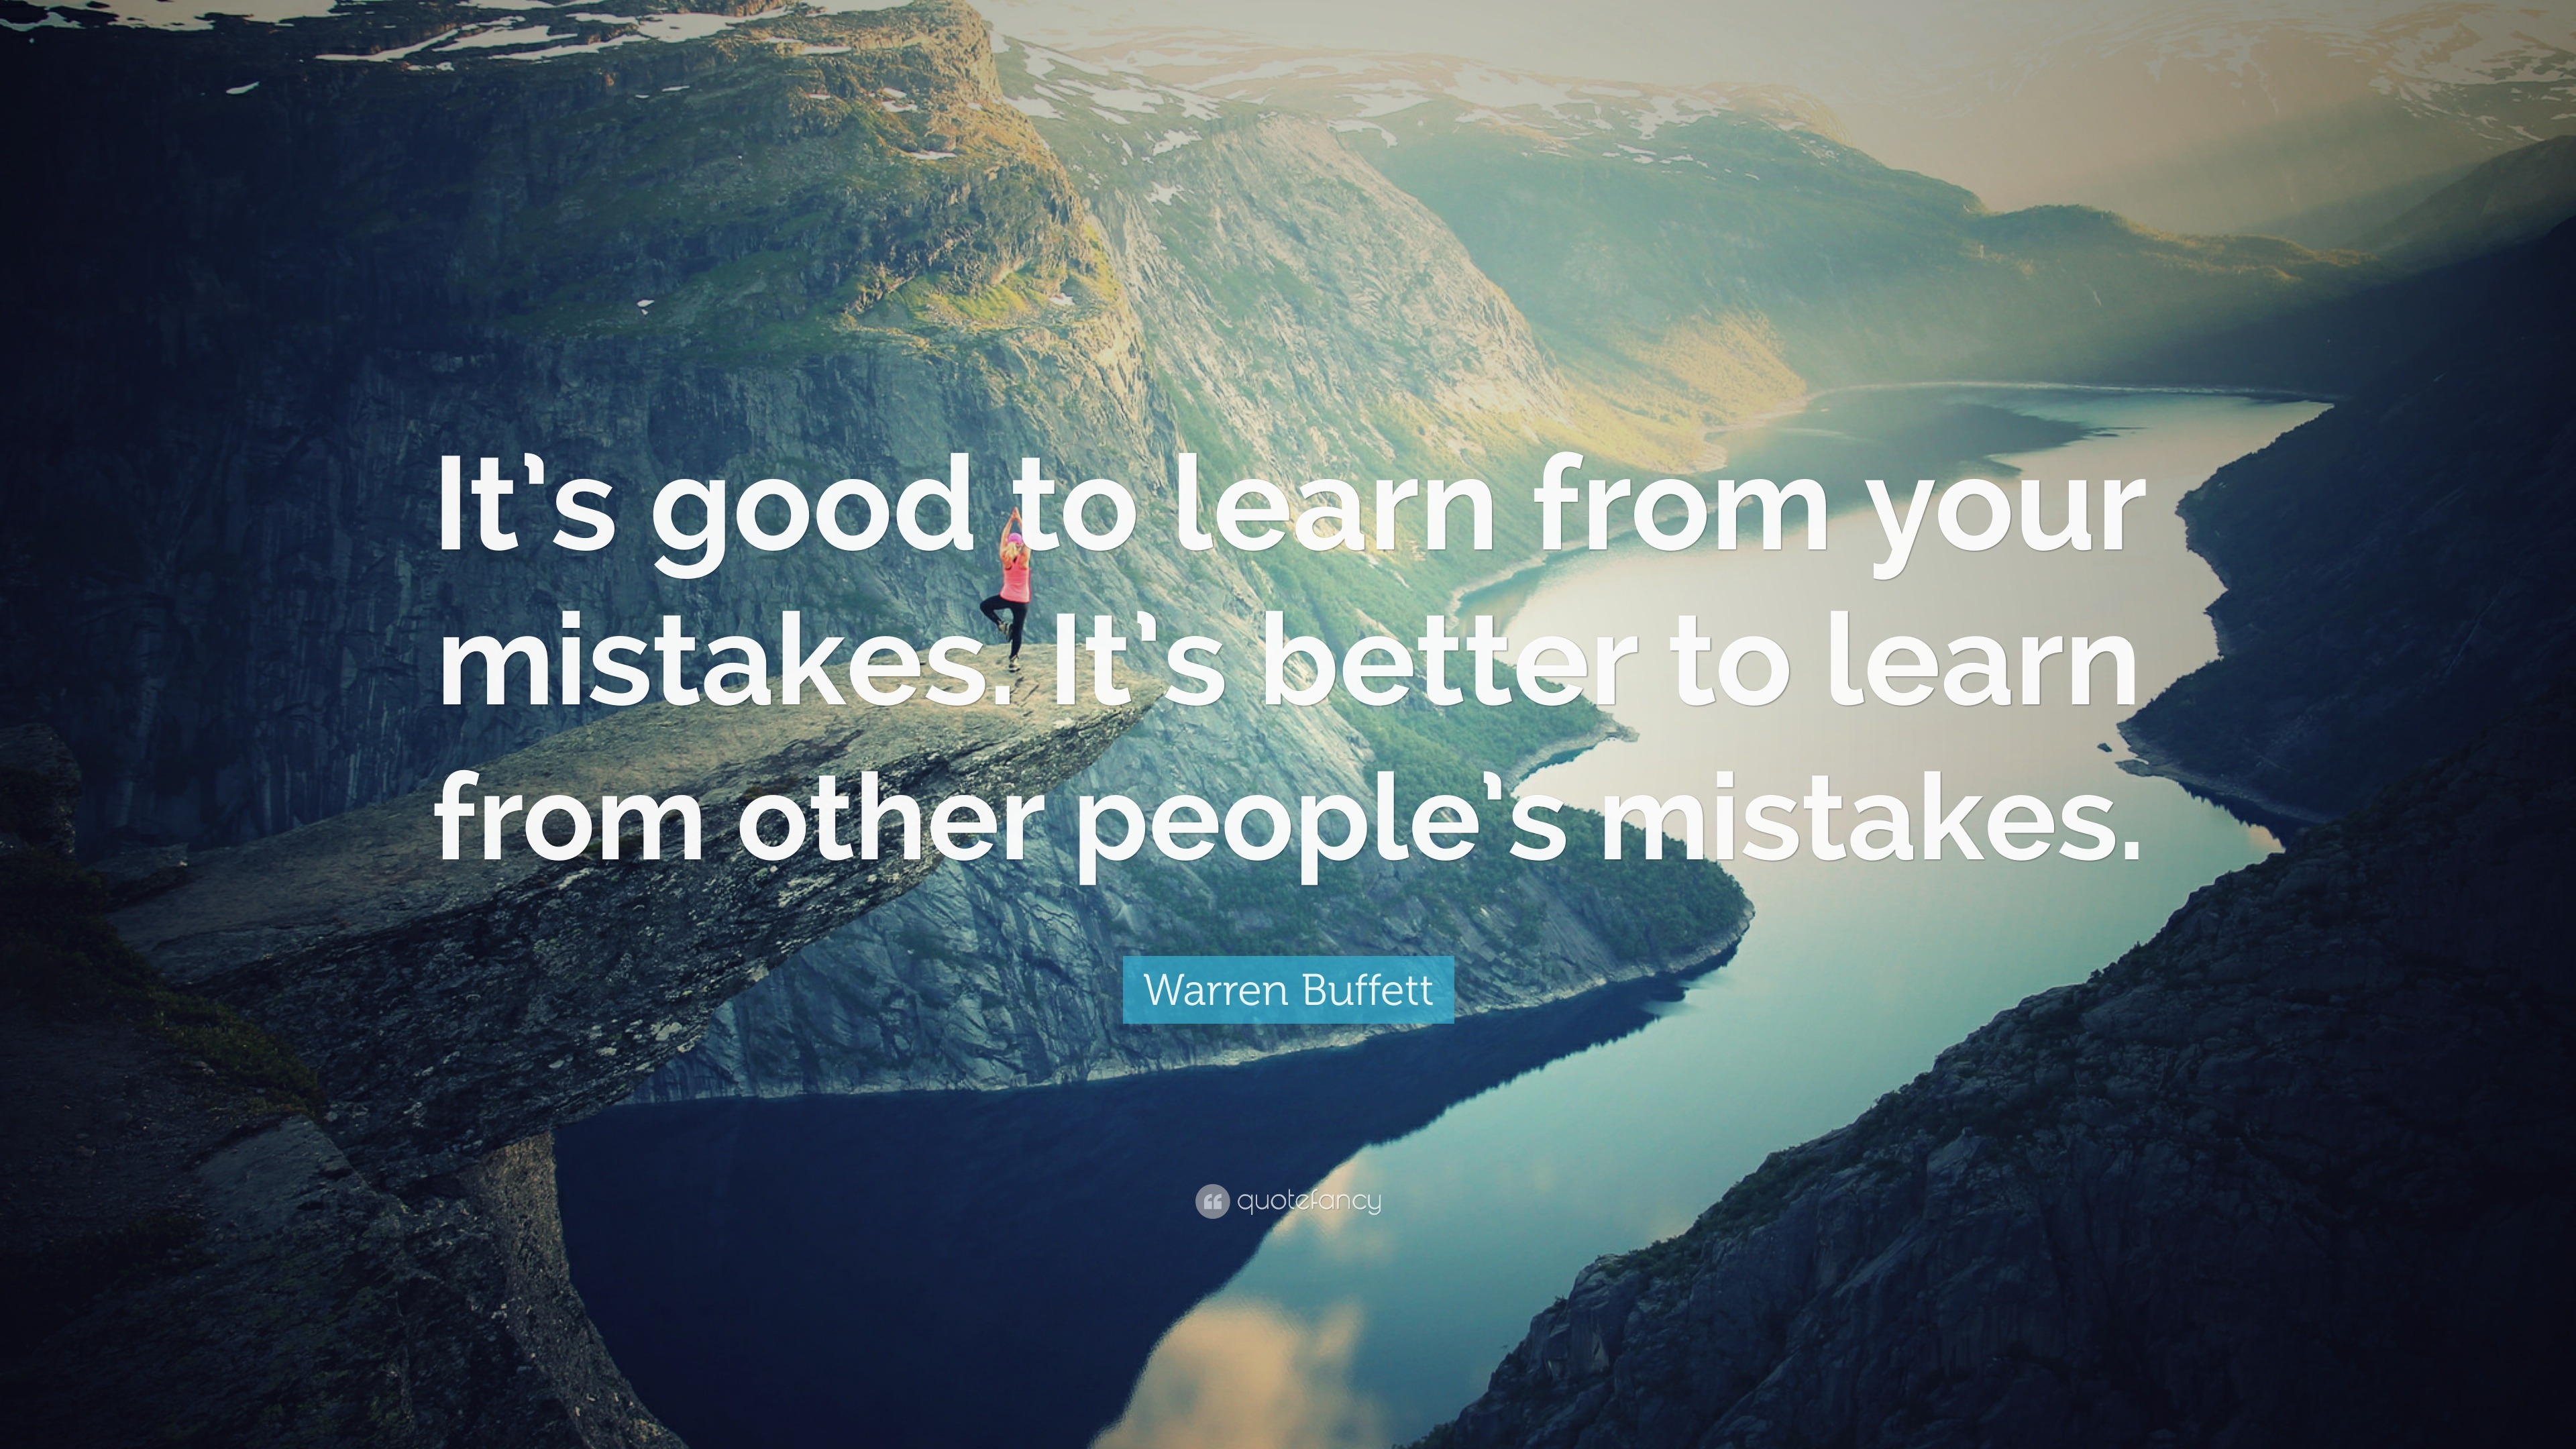 warren-buffett-quote-it-s-good-to-learn-from-your-mistakes-it-s-better-to-learn-from-other